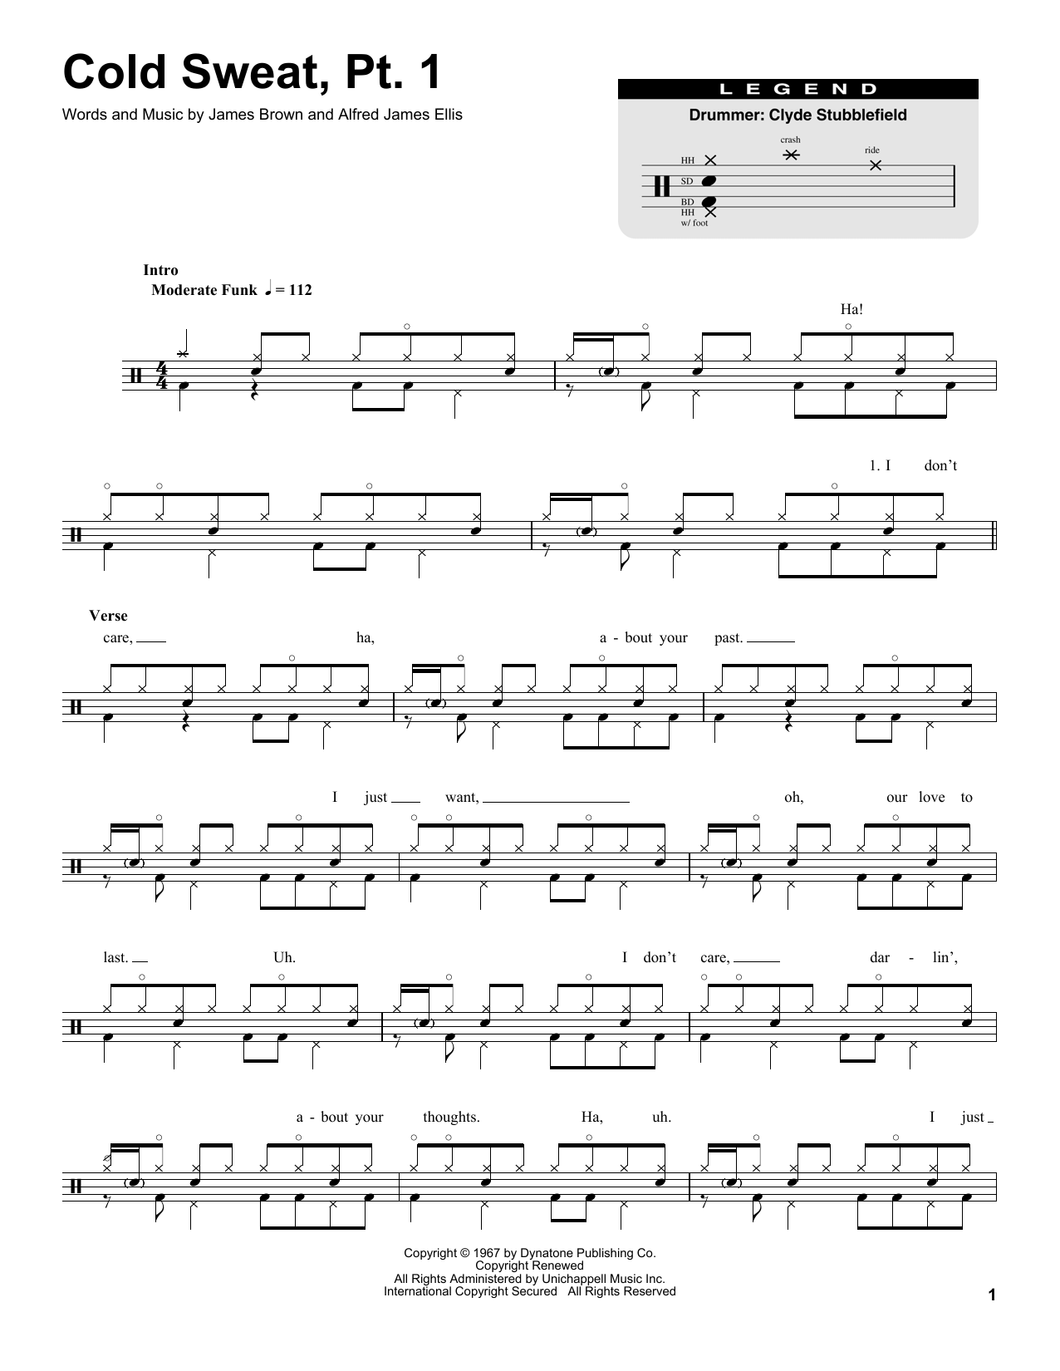 Cold Sweat, Pt. 1 - James Brown - Full Drum Transcription / Drum Sheet Music - SheetMusicDirect DT174656